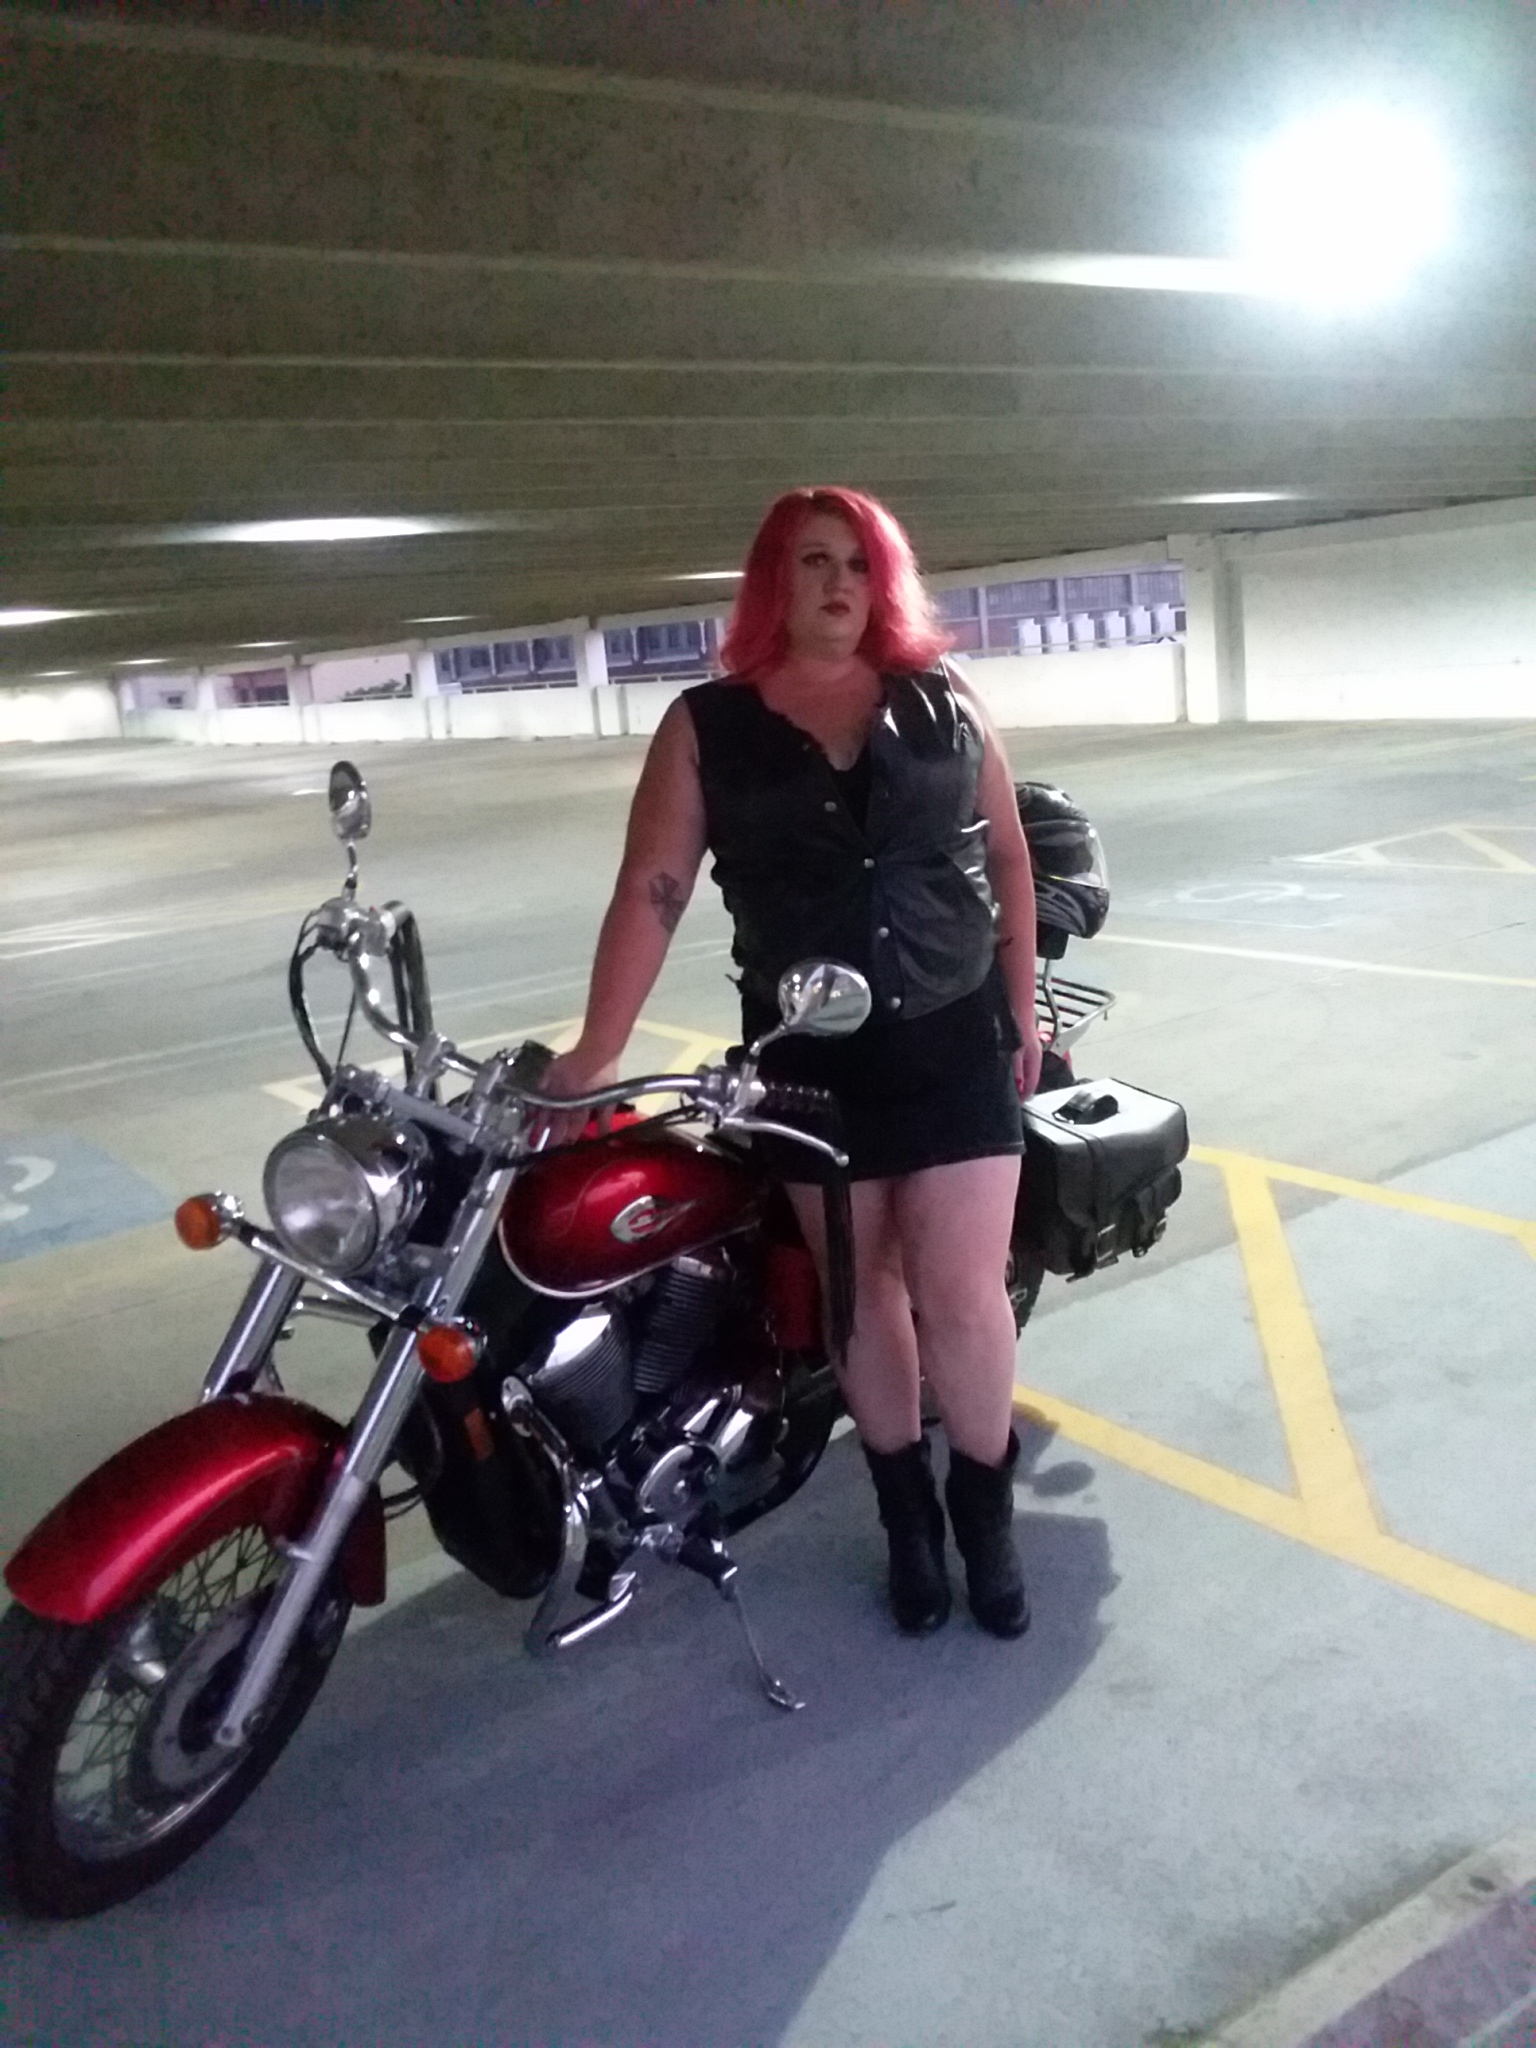 A woman with striking red hair stands beside a polished Honda Shadow ACE in a concrete parking garage. She wear a leather vest snapped closed, a skirt and high heeled boots. Above and to her right, a bright light bathes the scene with intense white illumination.